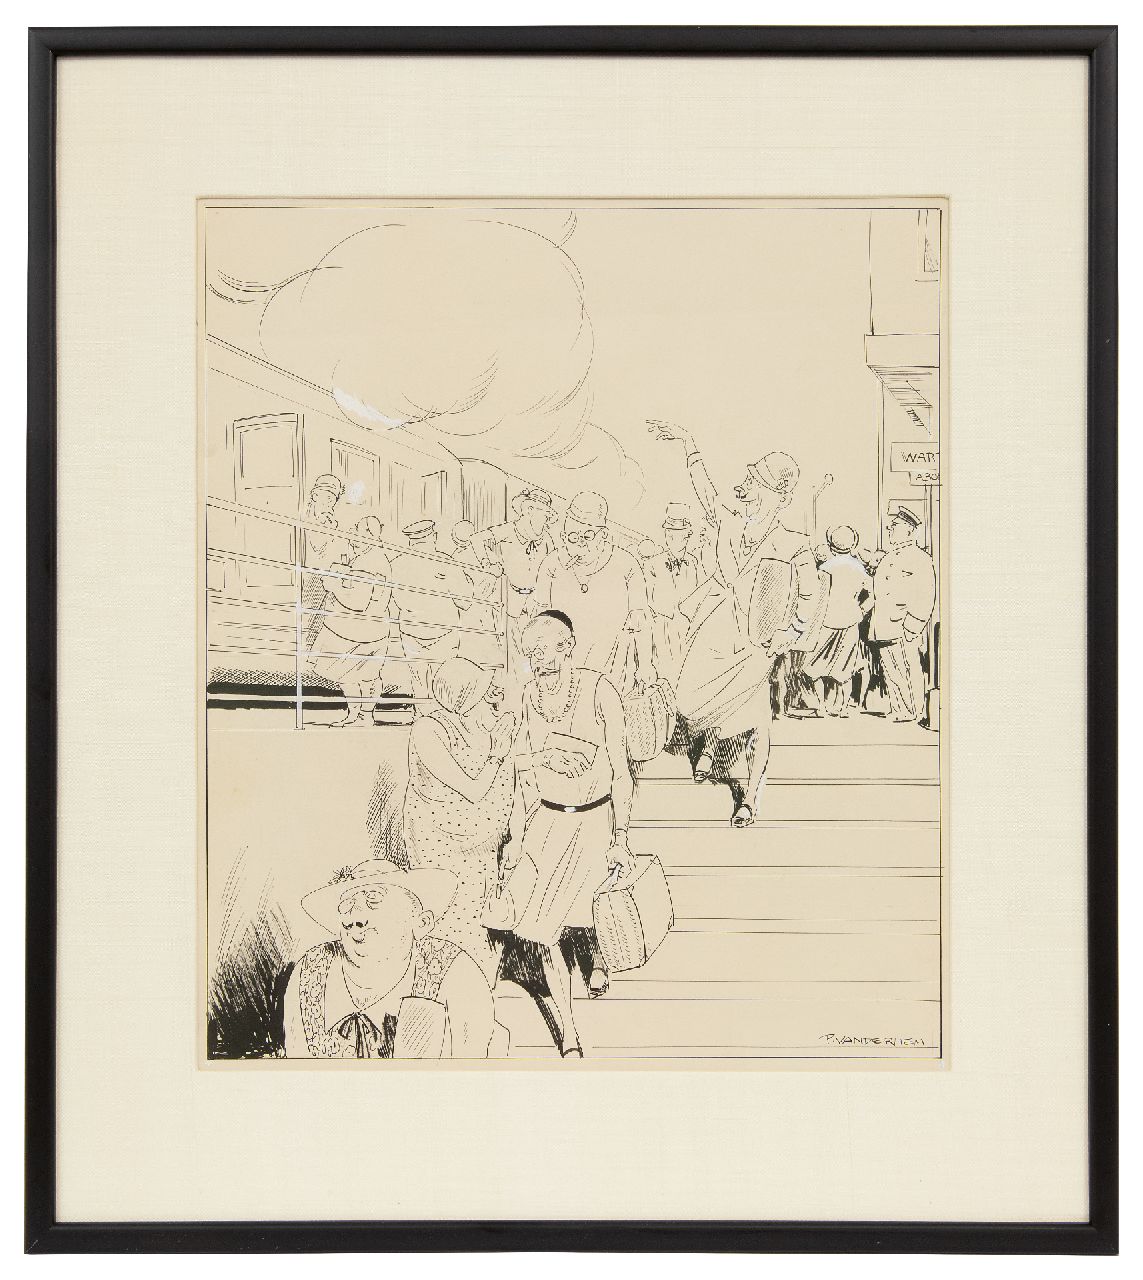 Hem P. van der | Pieter 'Piet' van der Hem | Watercolours and drawings offered for sale | Summer crowds at the station, ink and watercolour on paper 49.8 x 35.0 cm, signed l.r.